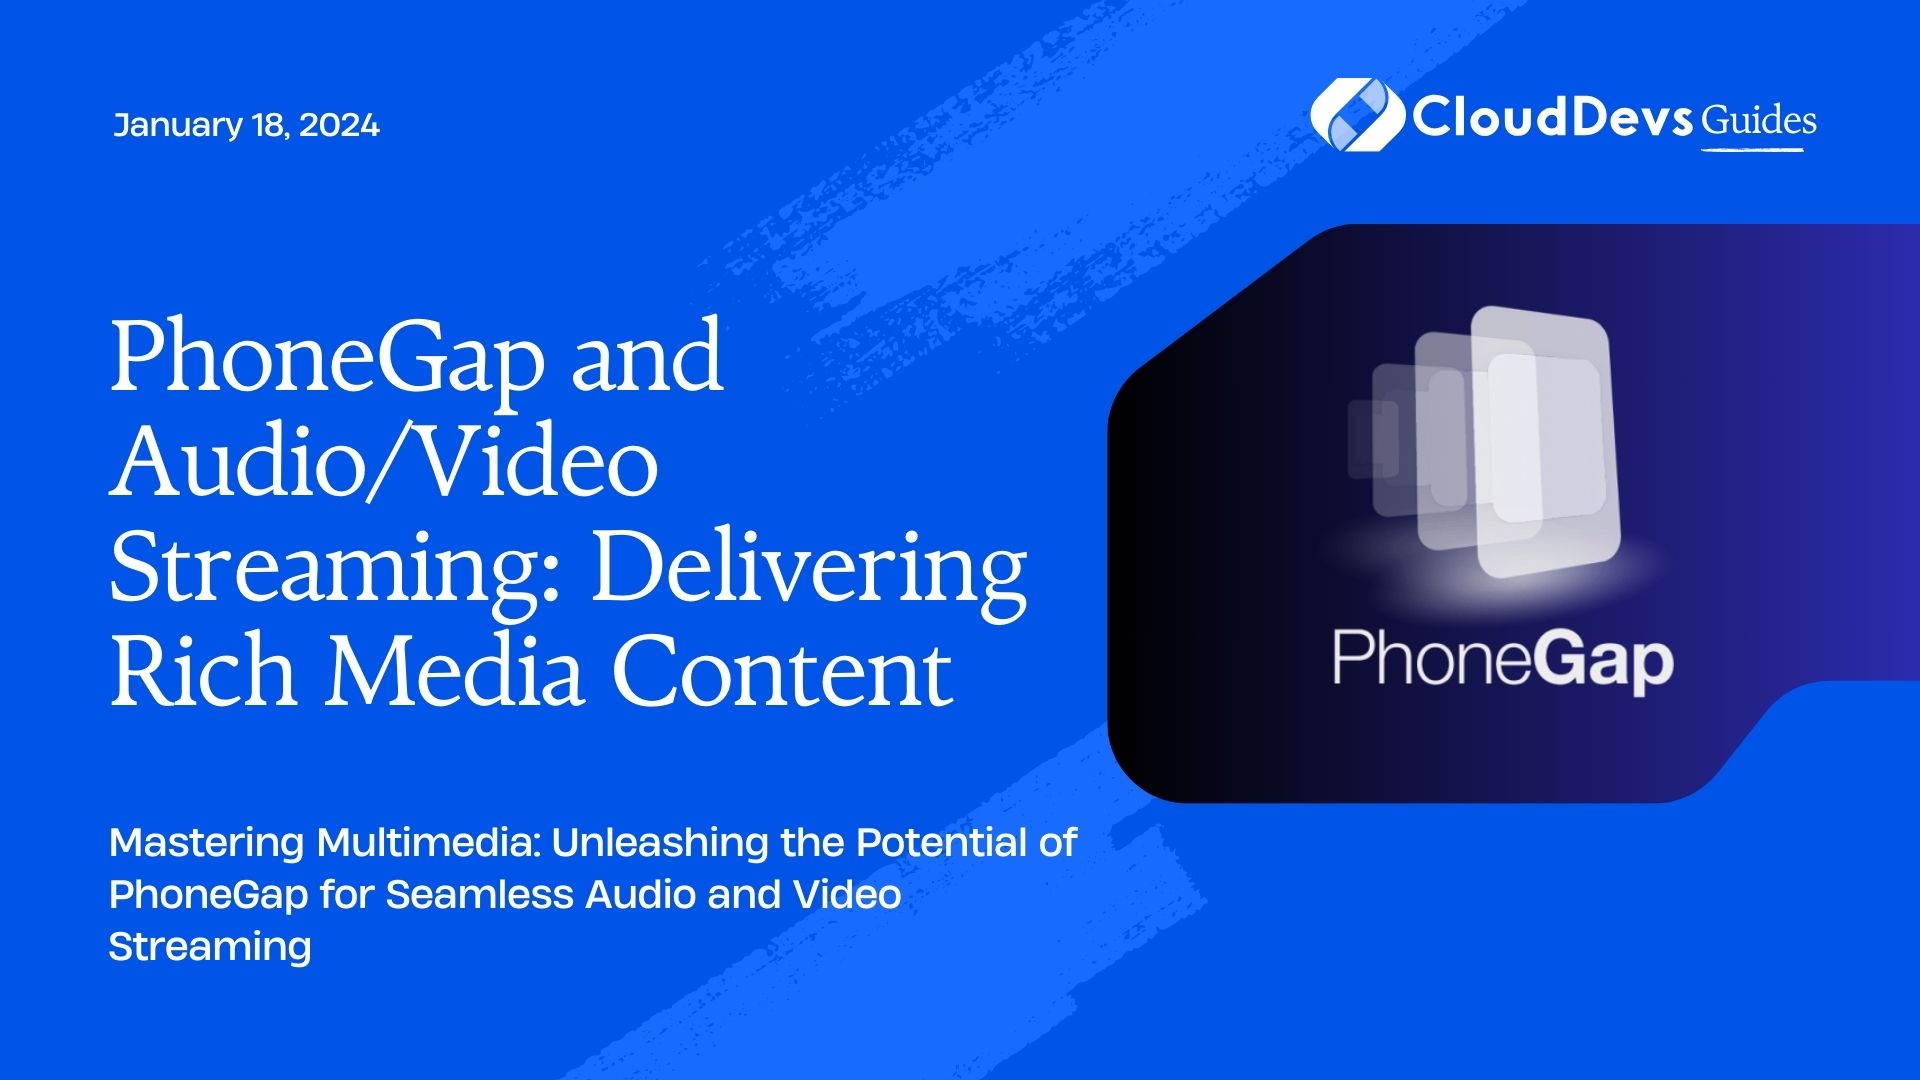 PhoneGap and Audio/Video Streaming: Delivering Rich Media Content